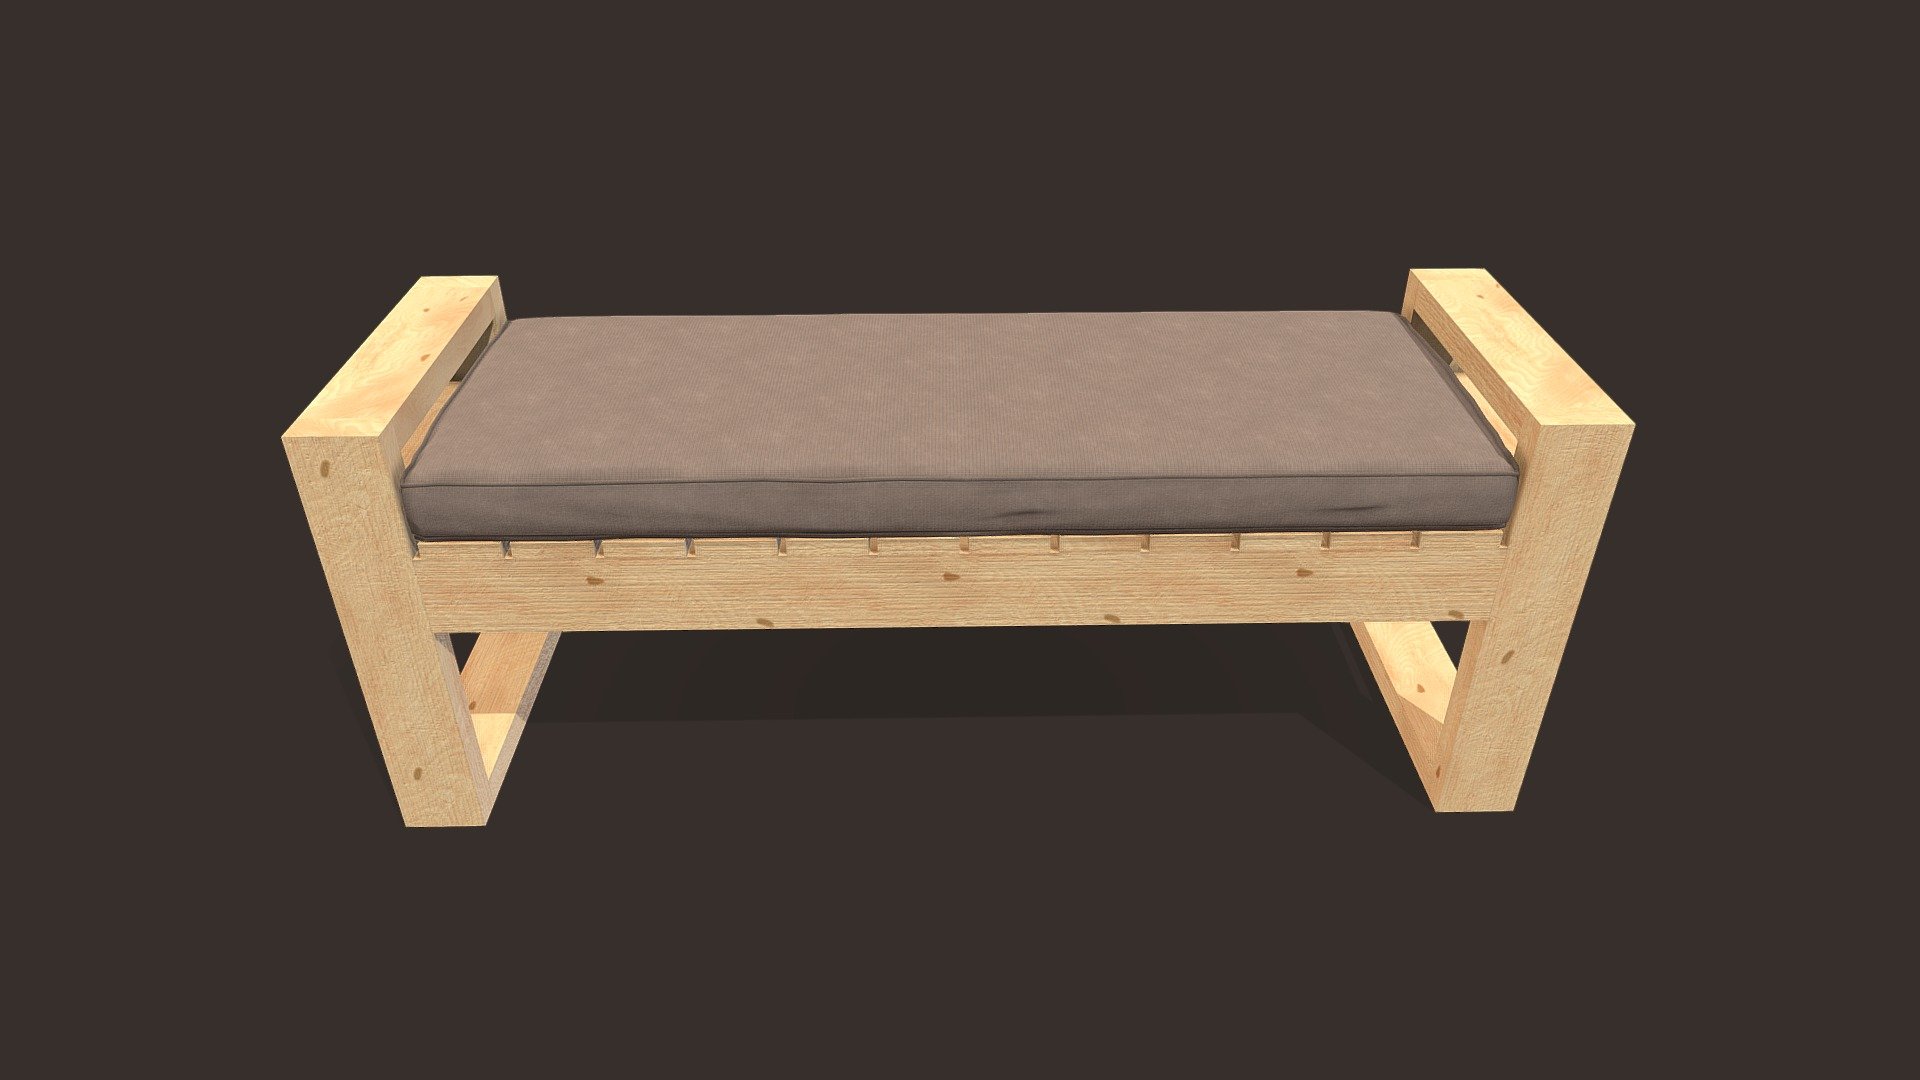 Backless bench  is a model that will enhance detail and realism to any of your rendering projects. The model has a fully textured, detailed design that allows for close-up renders, and was originally modeled in Blender 3.5, Textured in Substance Painter 2023 and rendered with Adobe Stagier Renders have no post-processing.

Features: -High-quality polygonal model, correctly scaled for an accurate representation of the original object. -The model’s resolutions are optimized for polygon efficiency. -The model is fully textured with all materials applied. -All textures and materials are included and mapped in every format. -No cleaning up necessary just drop your models into the scene and start rendering. -No special plugin needed to open scene.

Measurements: Units: M

File Formats: OBJ FBX

Textures Formats: PNG 4k - Backless bench - Buy Royalty Free 3D model by MDgraphicLAB 3d model